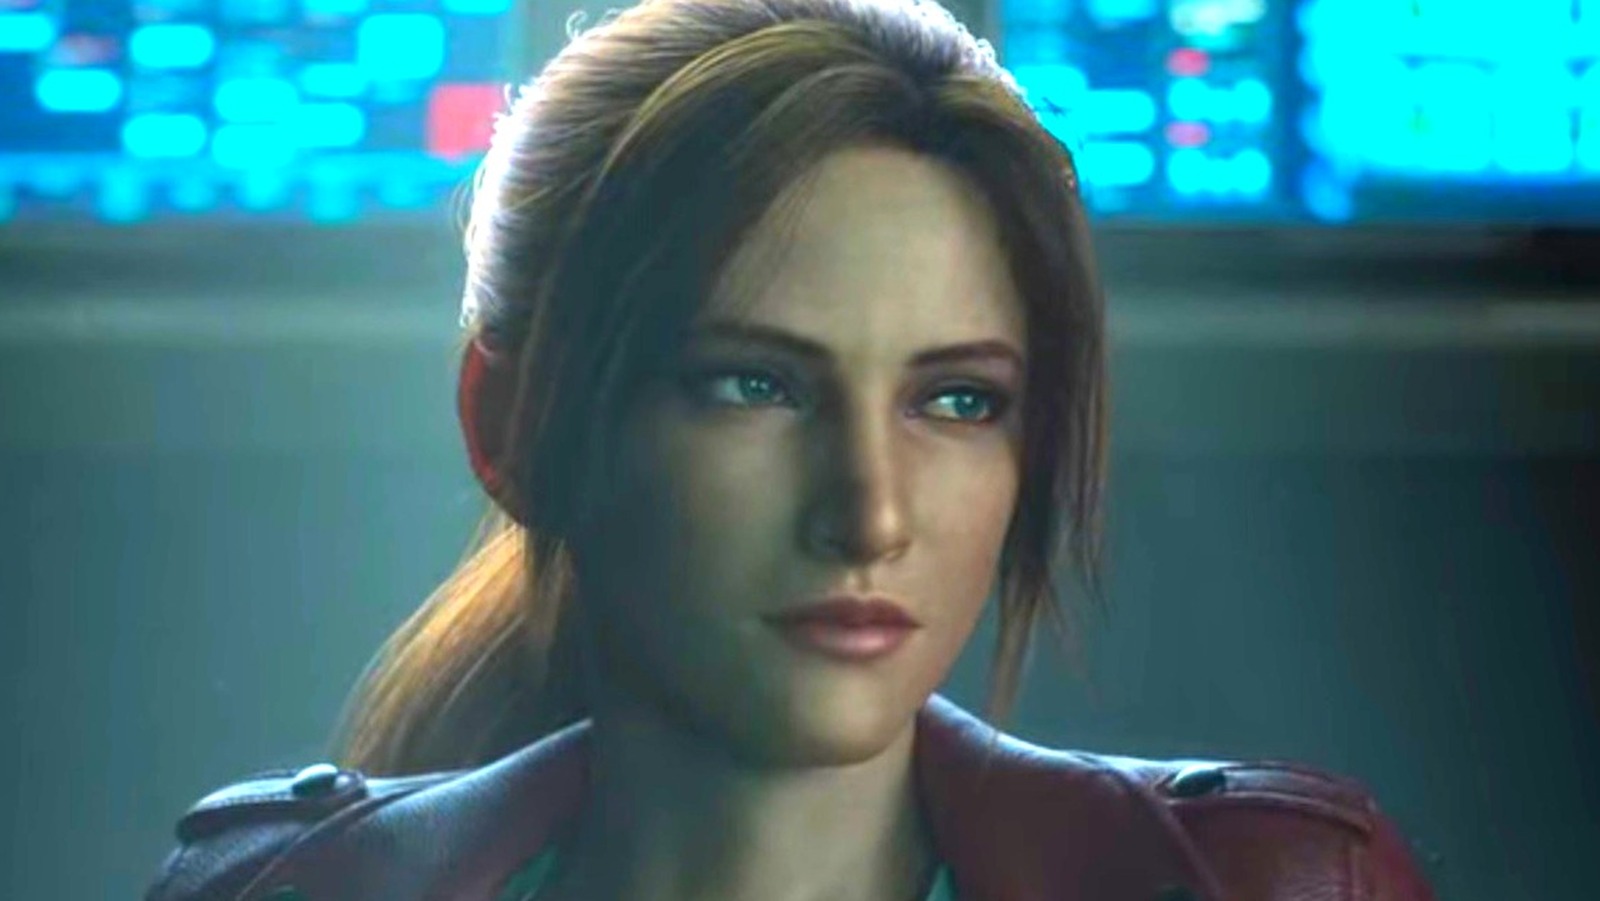 Resident Evil: Infinite Darkness': What Happens Next for Claire Redfield?